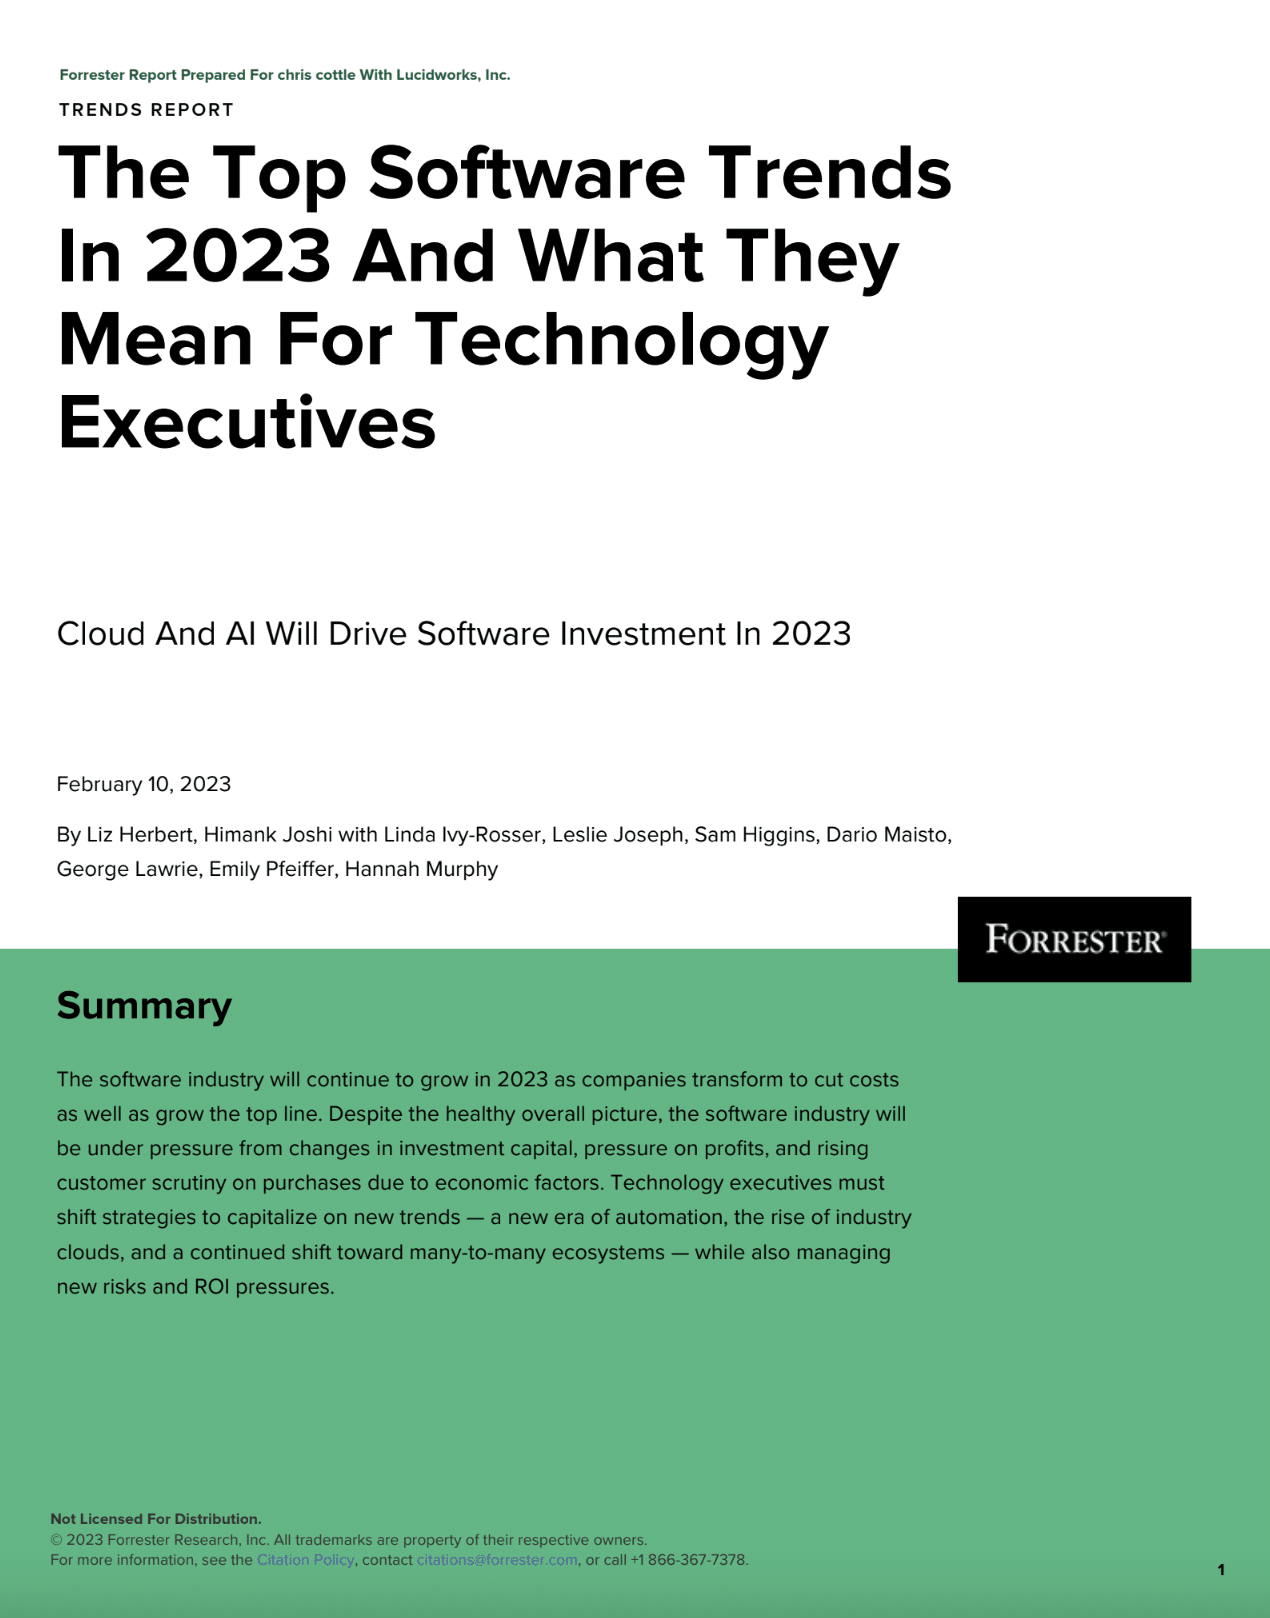 cover of report with black title text that reads "The Top Software Trends in 2023"